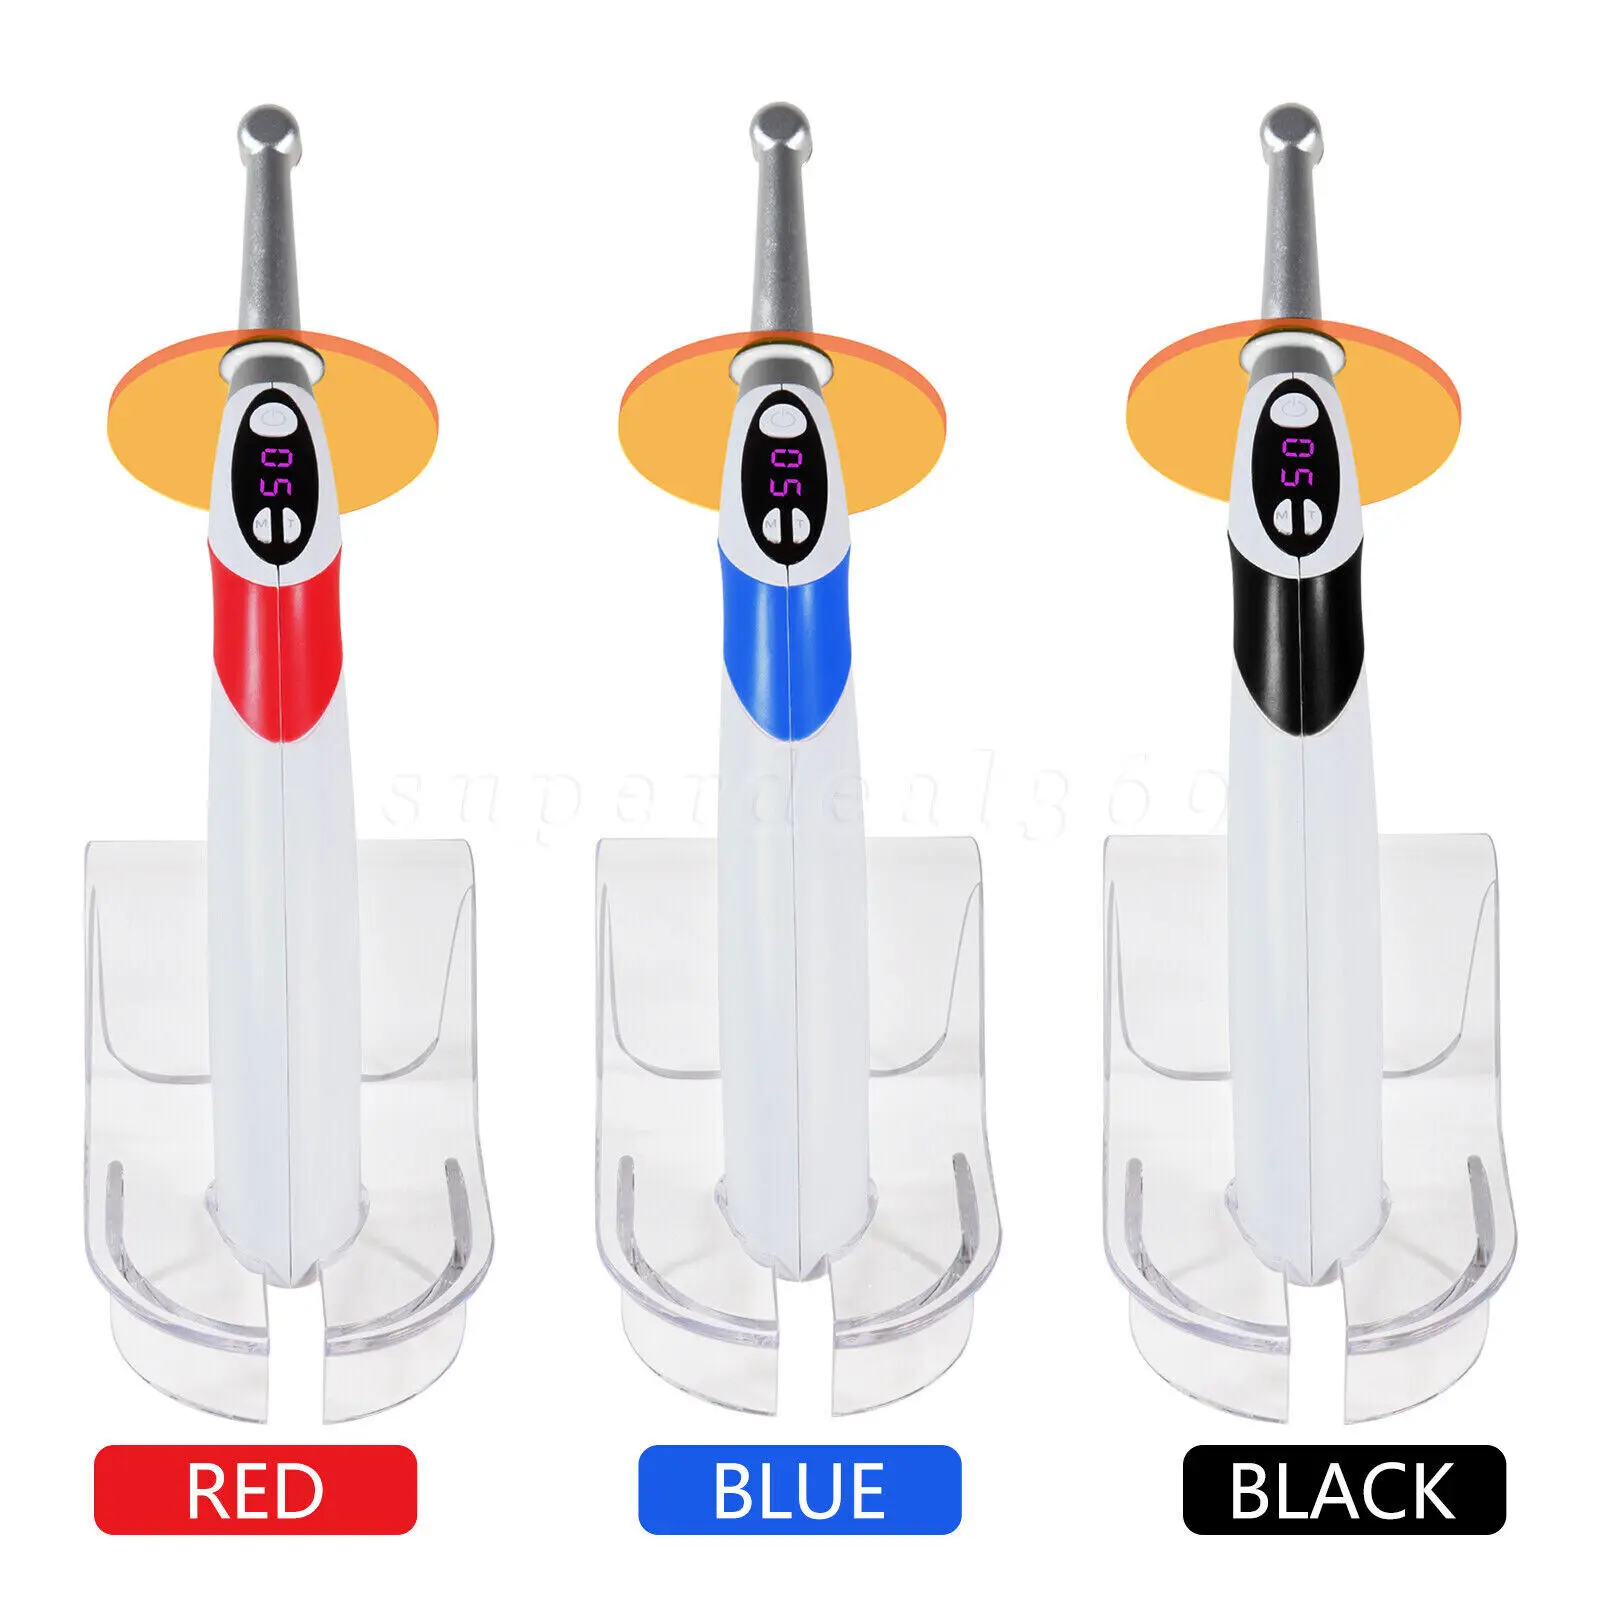 

Wireless Cordless Style Dental LED Curing Light 1 Second Cure Lamp Cordless 3 Modes Metal Head/Glasses Goggles